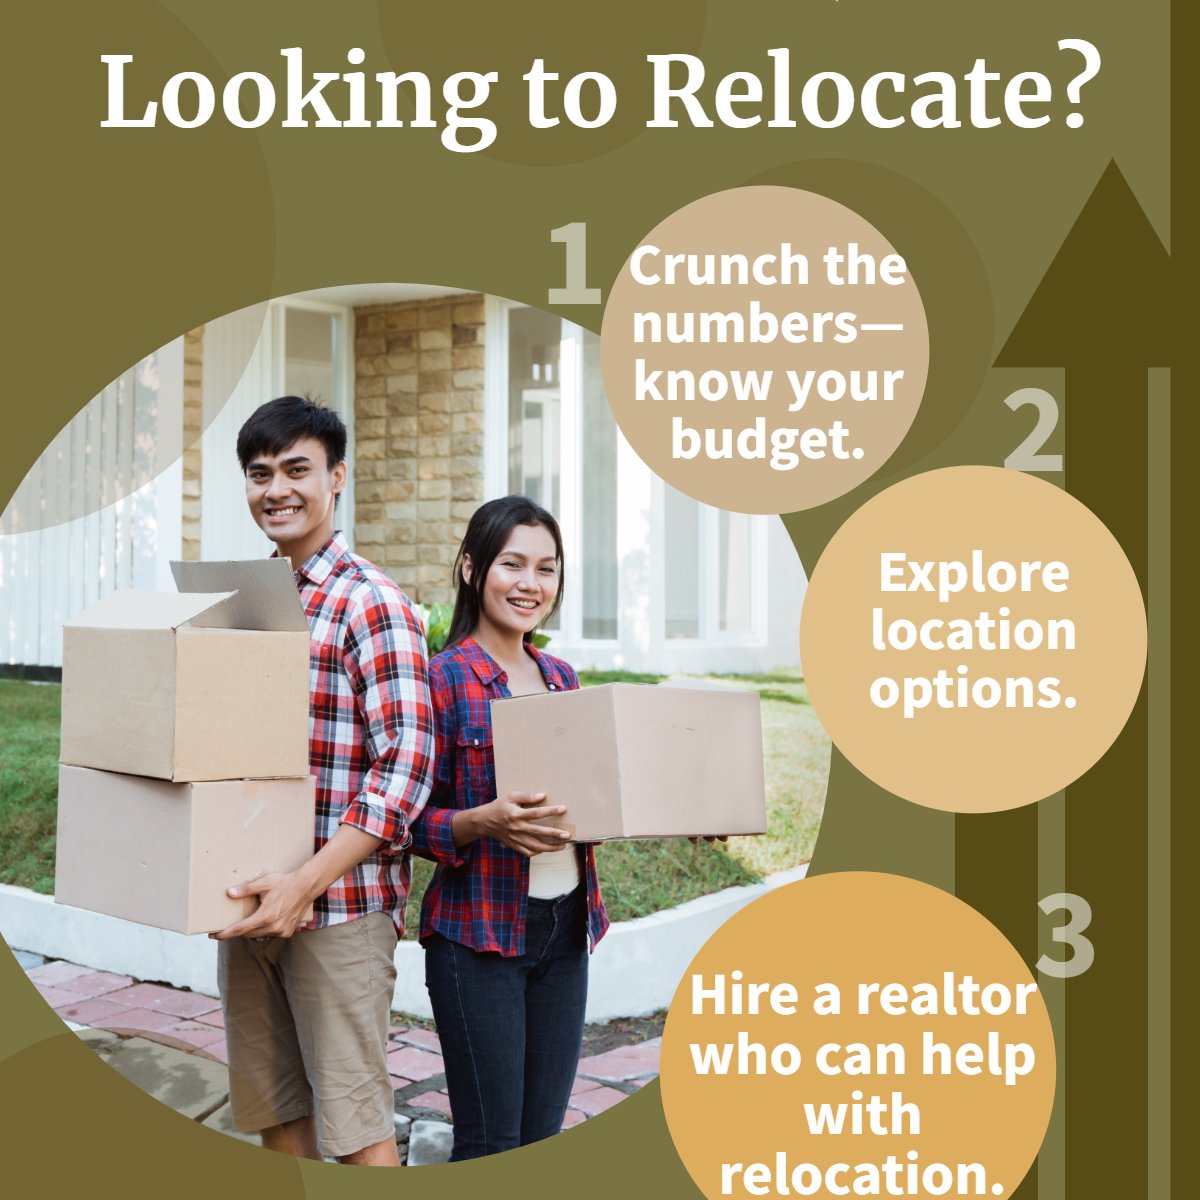 Ready to explore new horizons? 

Relocating could be the adventure you've been waiting for! 🌟

#NewBeginnings #DreamHome #AdventureAwaits